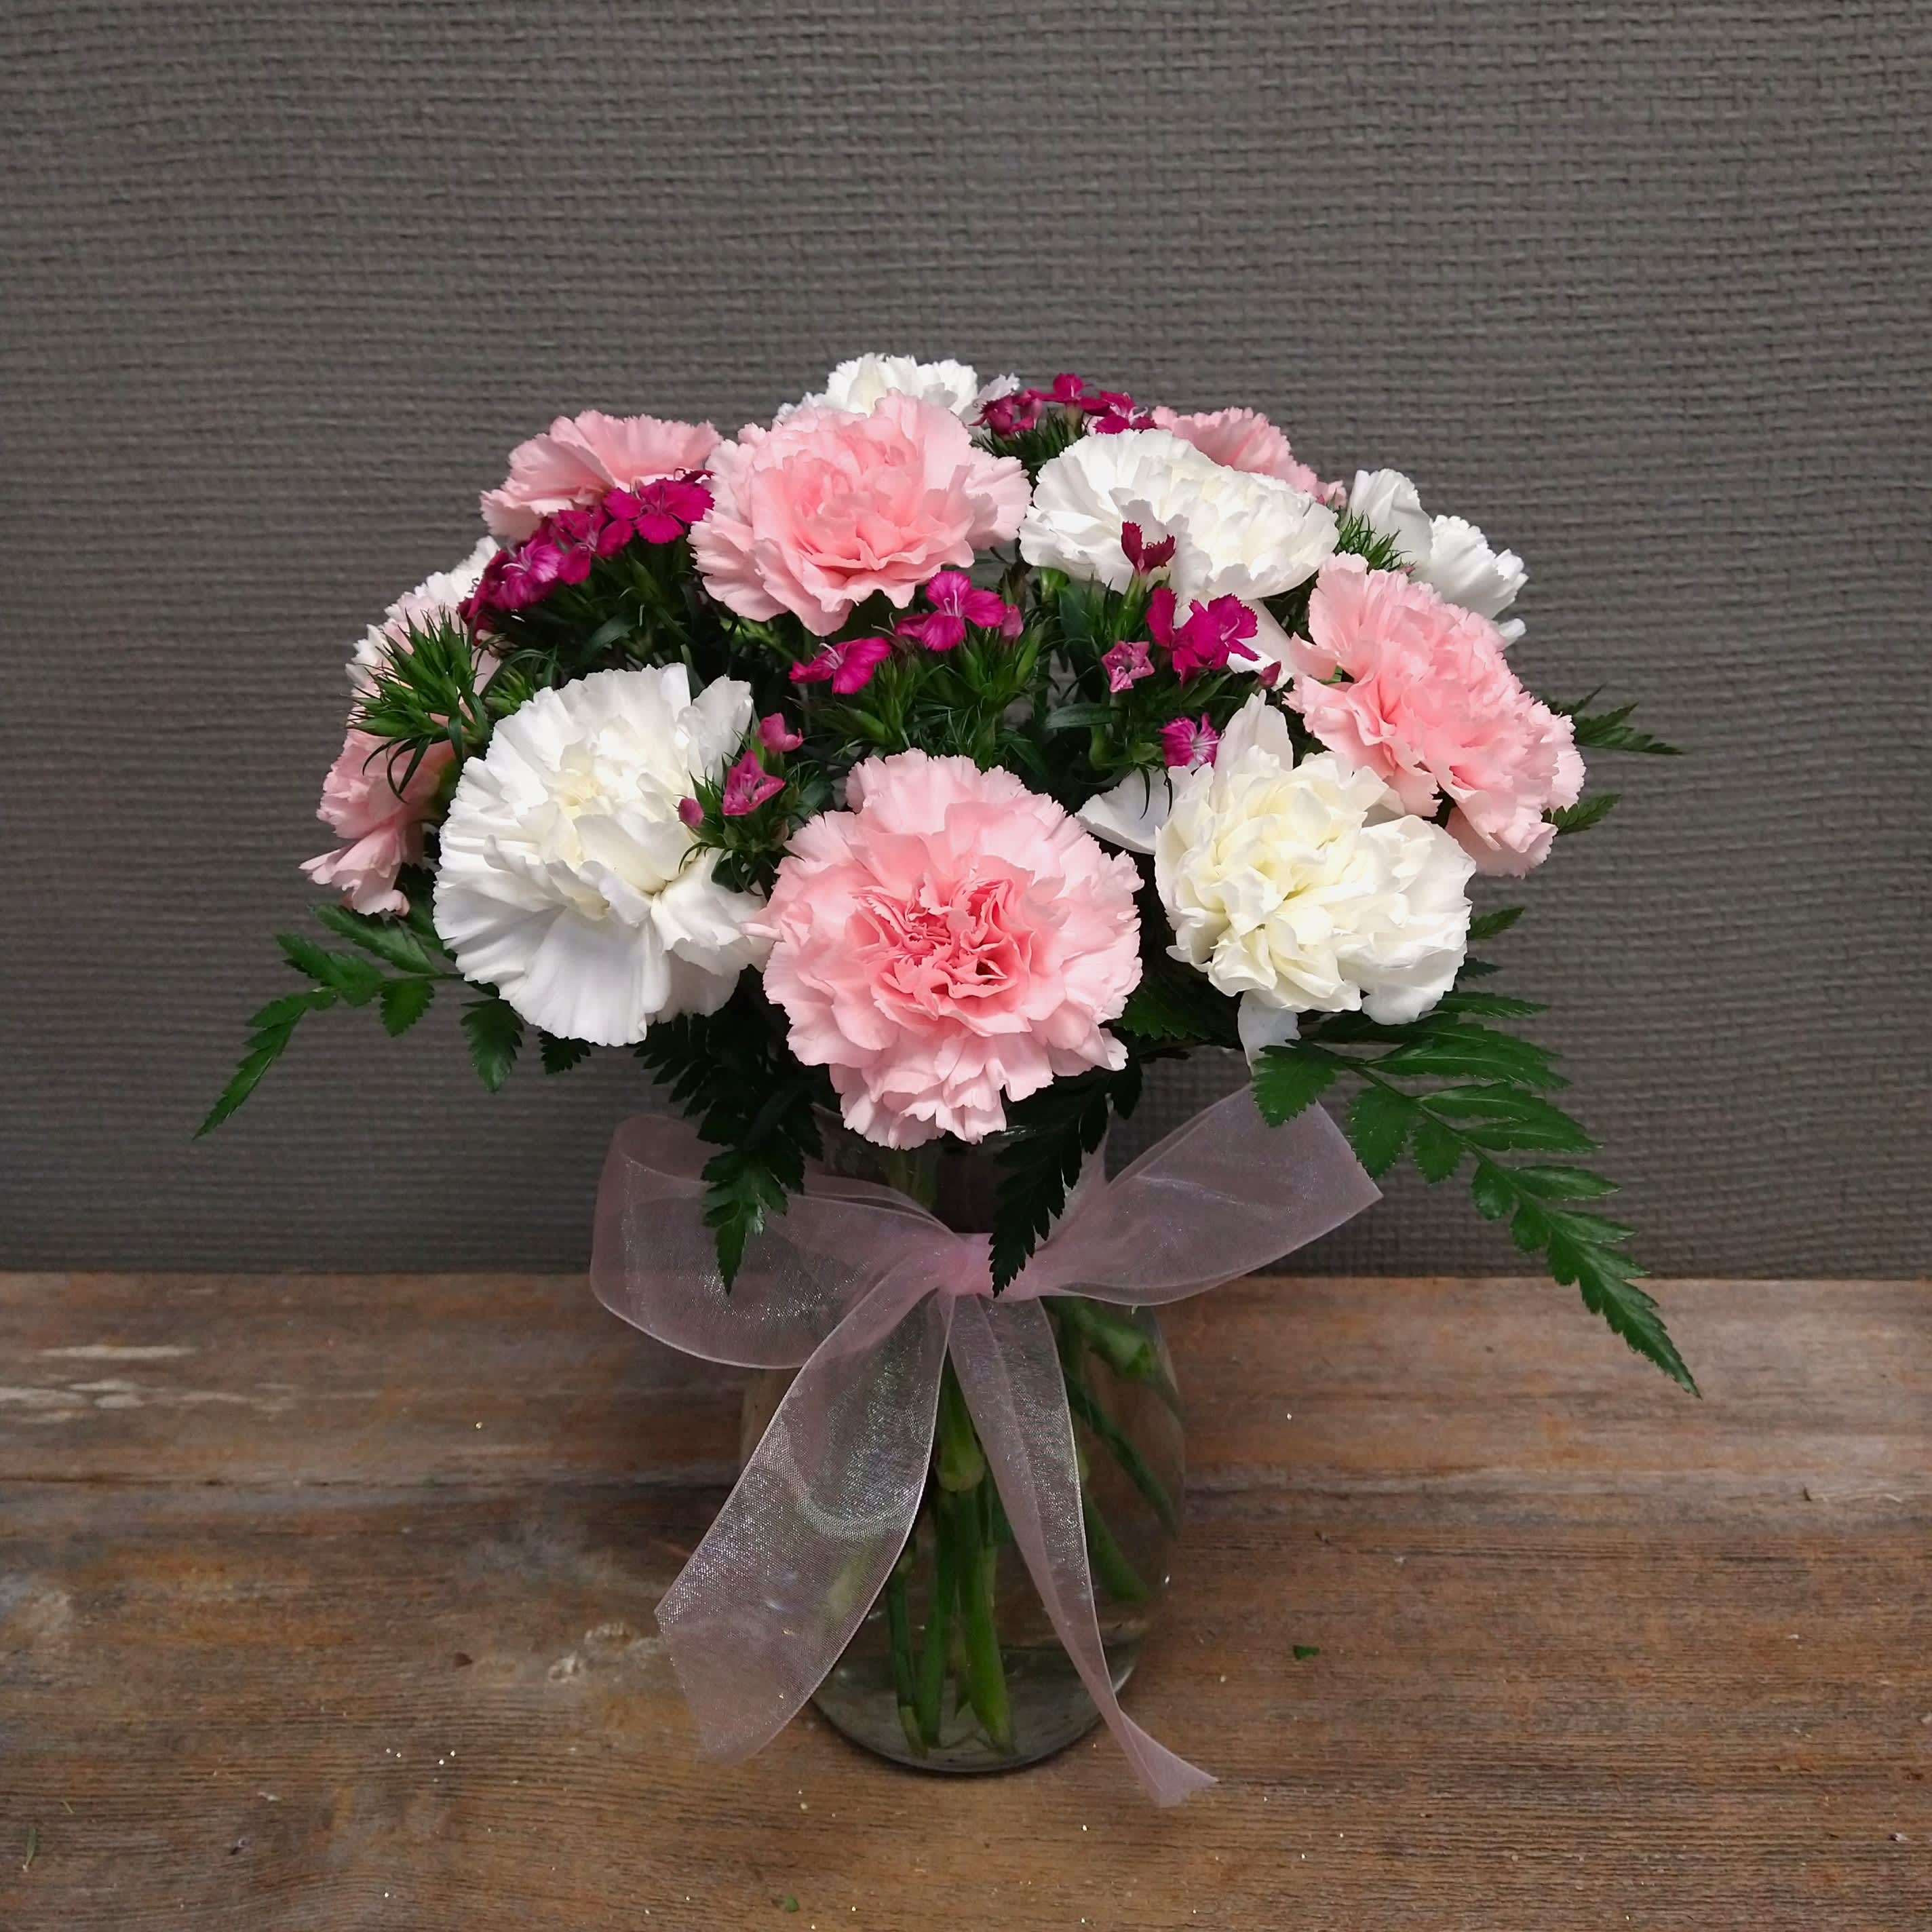 Carn-ival of Love - Remind your sweetheart of cotton candy and carousels with this super sweet arrangement. A dozen long-lasting pink and white carnations with bright gypsy dianthus filler. Perfect size for a desk, kitchen counter, or other small space! Upgraded sizes have 18 and 24 carnations respectively.